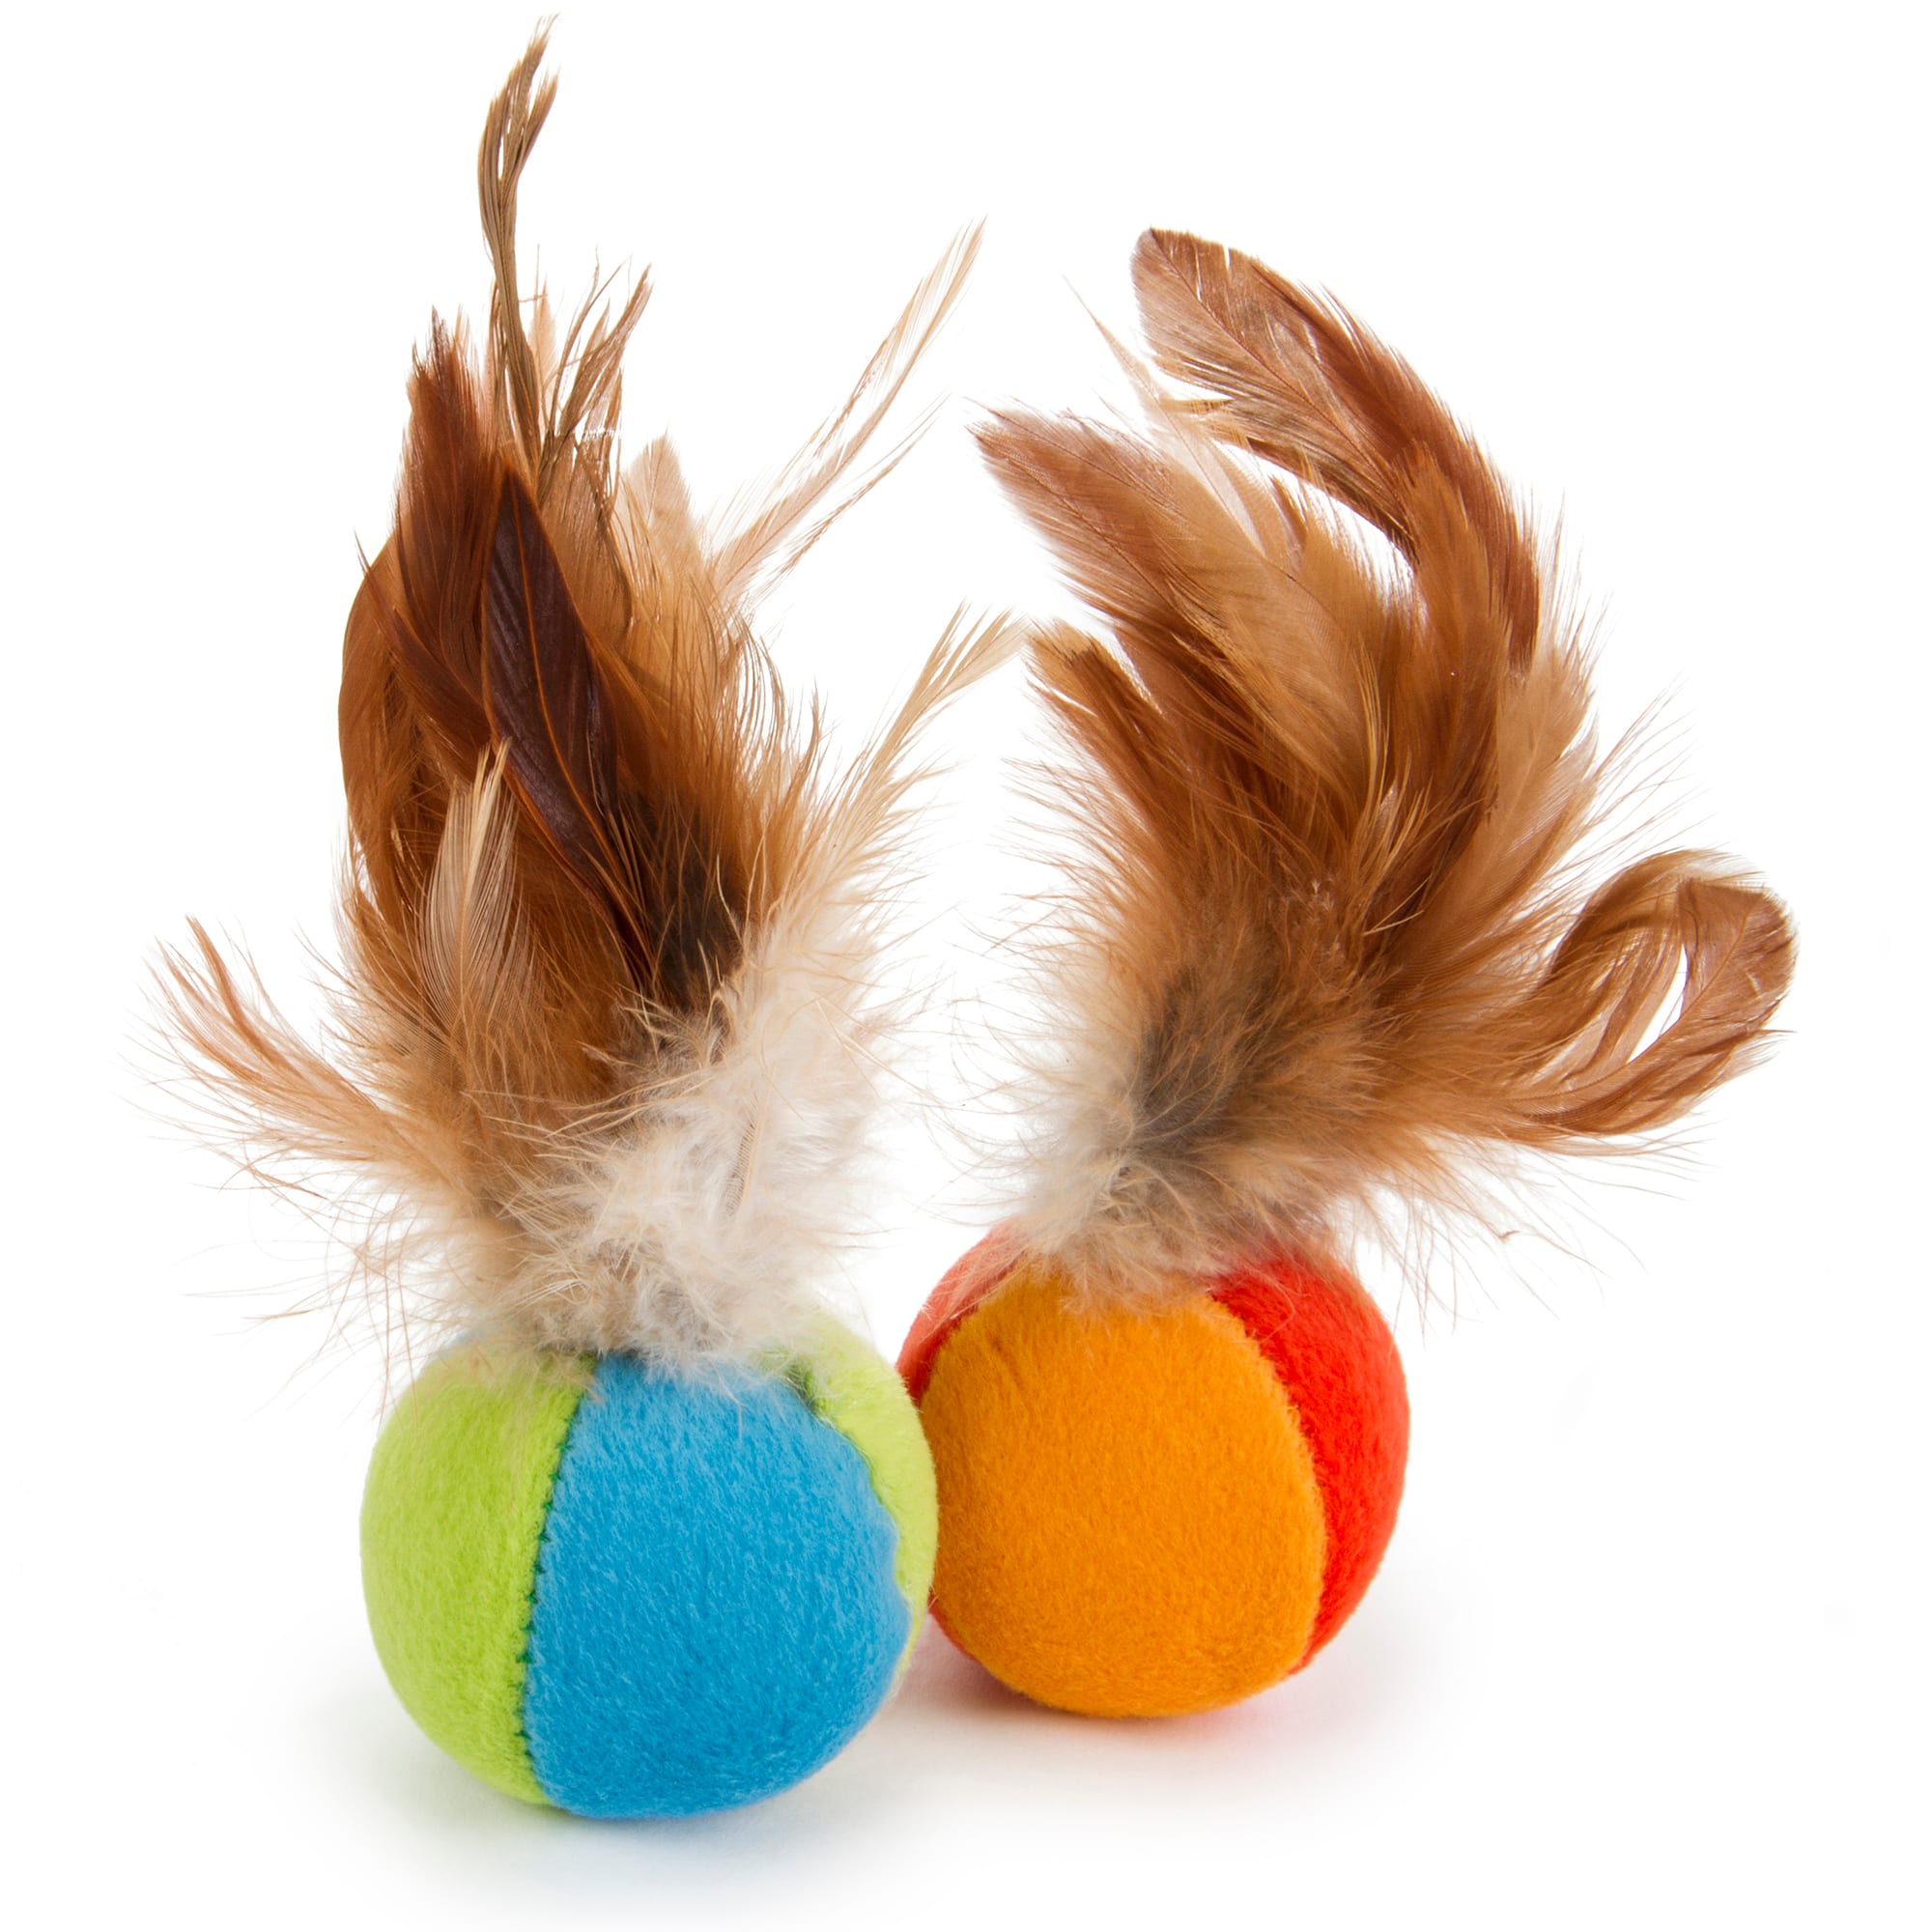 Photos - Cat Toy SmartyKat SmartyKat Flutter Balls Plush Catnip and Feather , Small